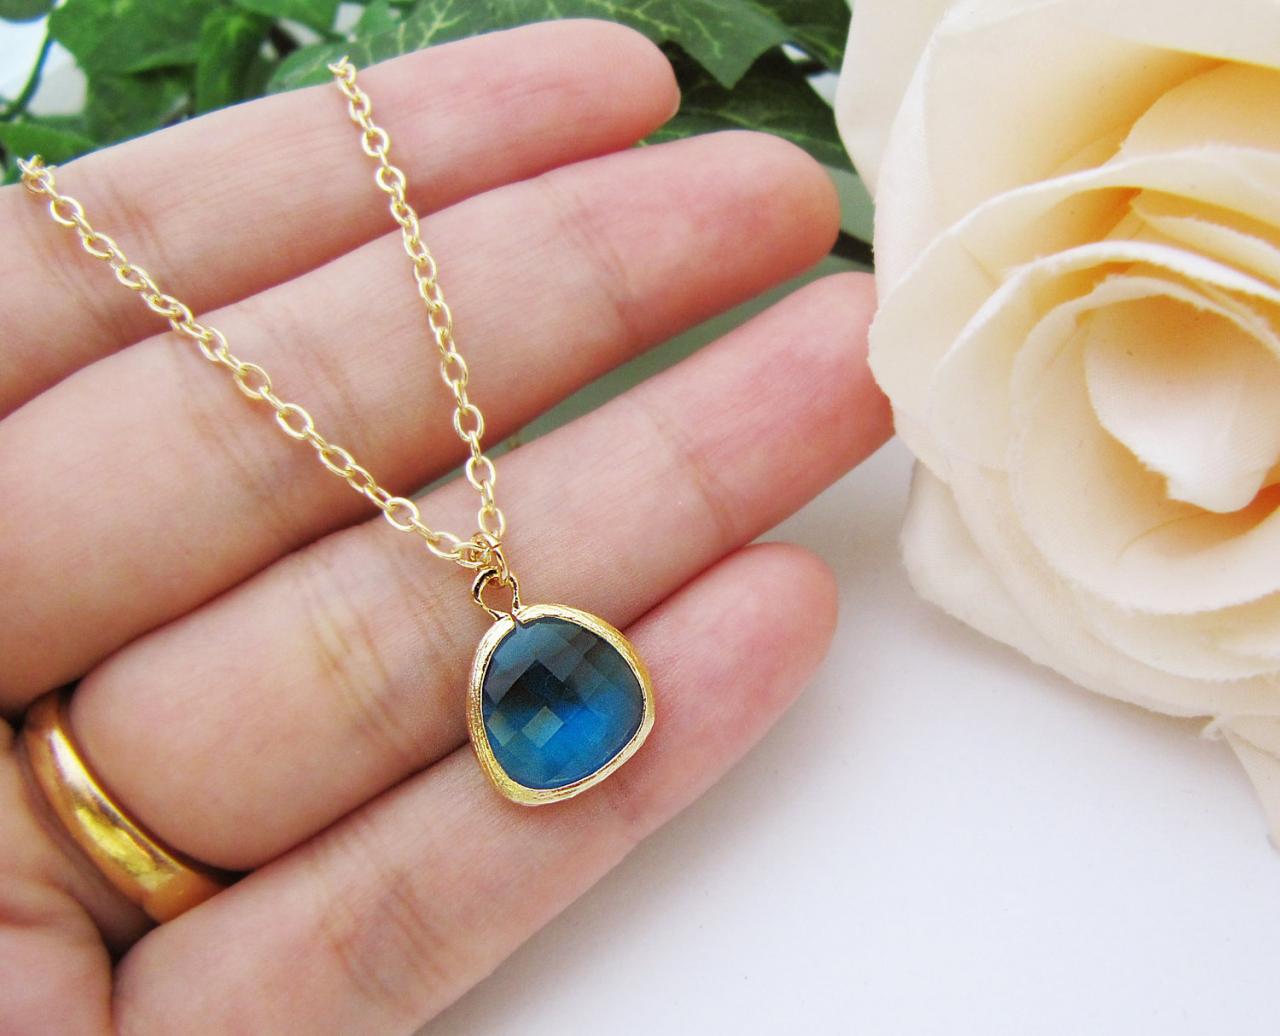 Sweet Simple - Capri Blue Glass Drop With Matte Gold Trimmed Necklace - Bridal Bridesmaid Gifts